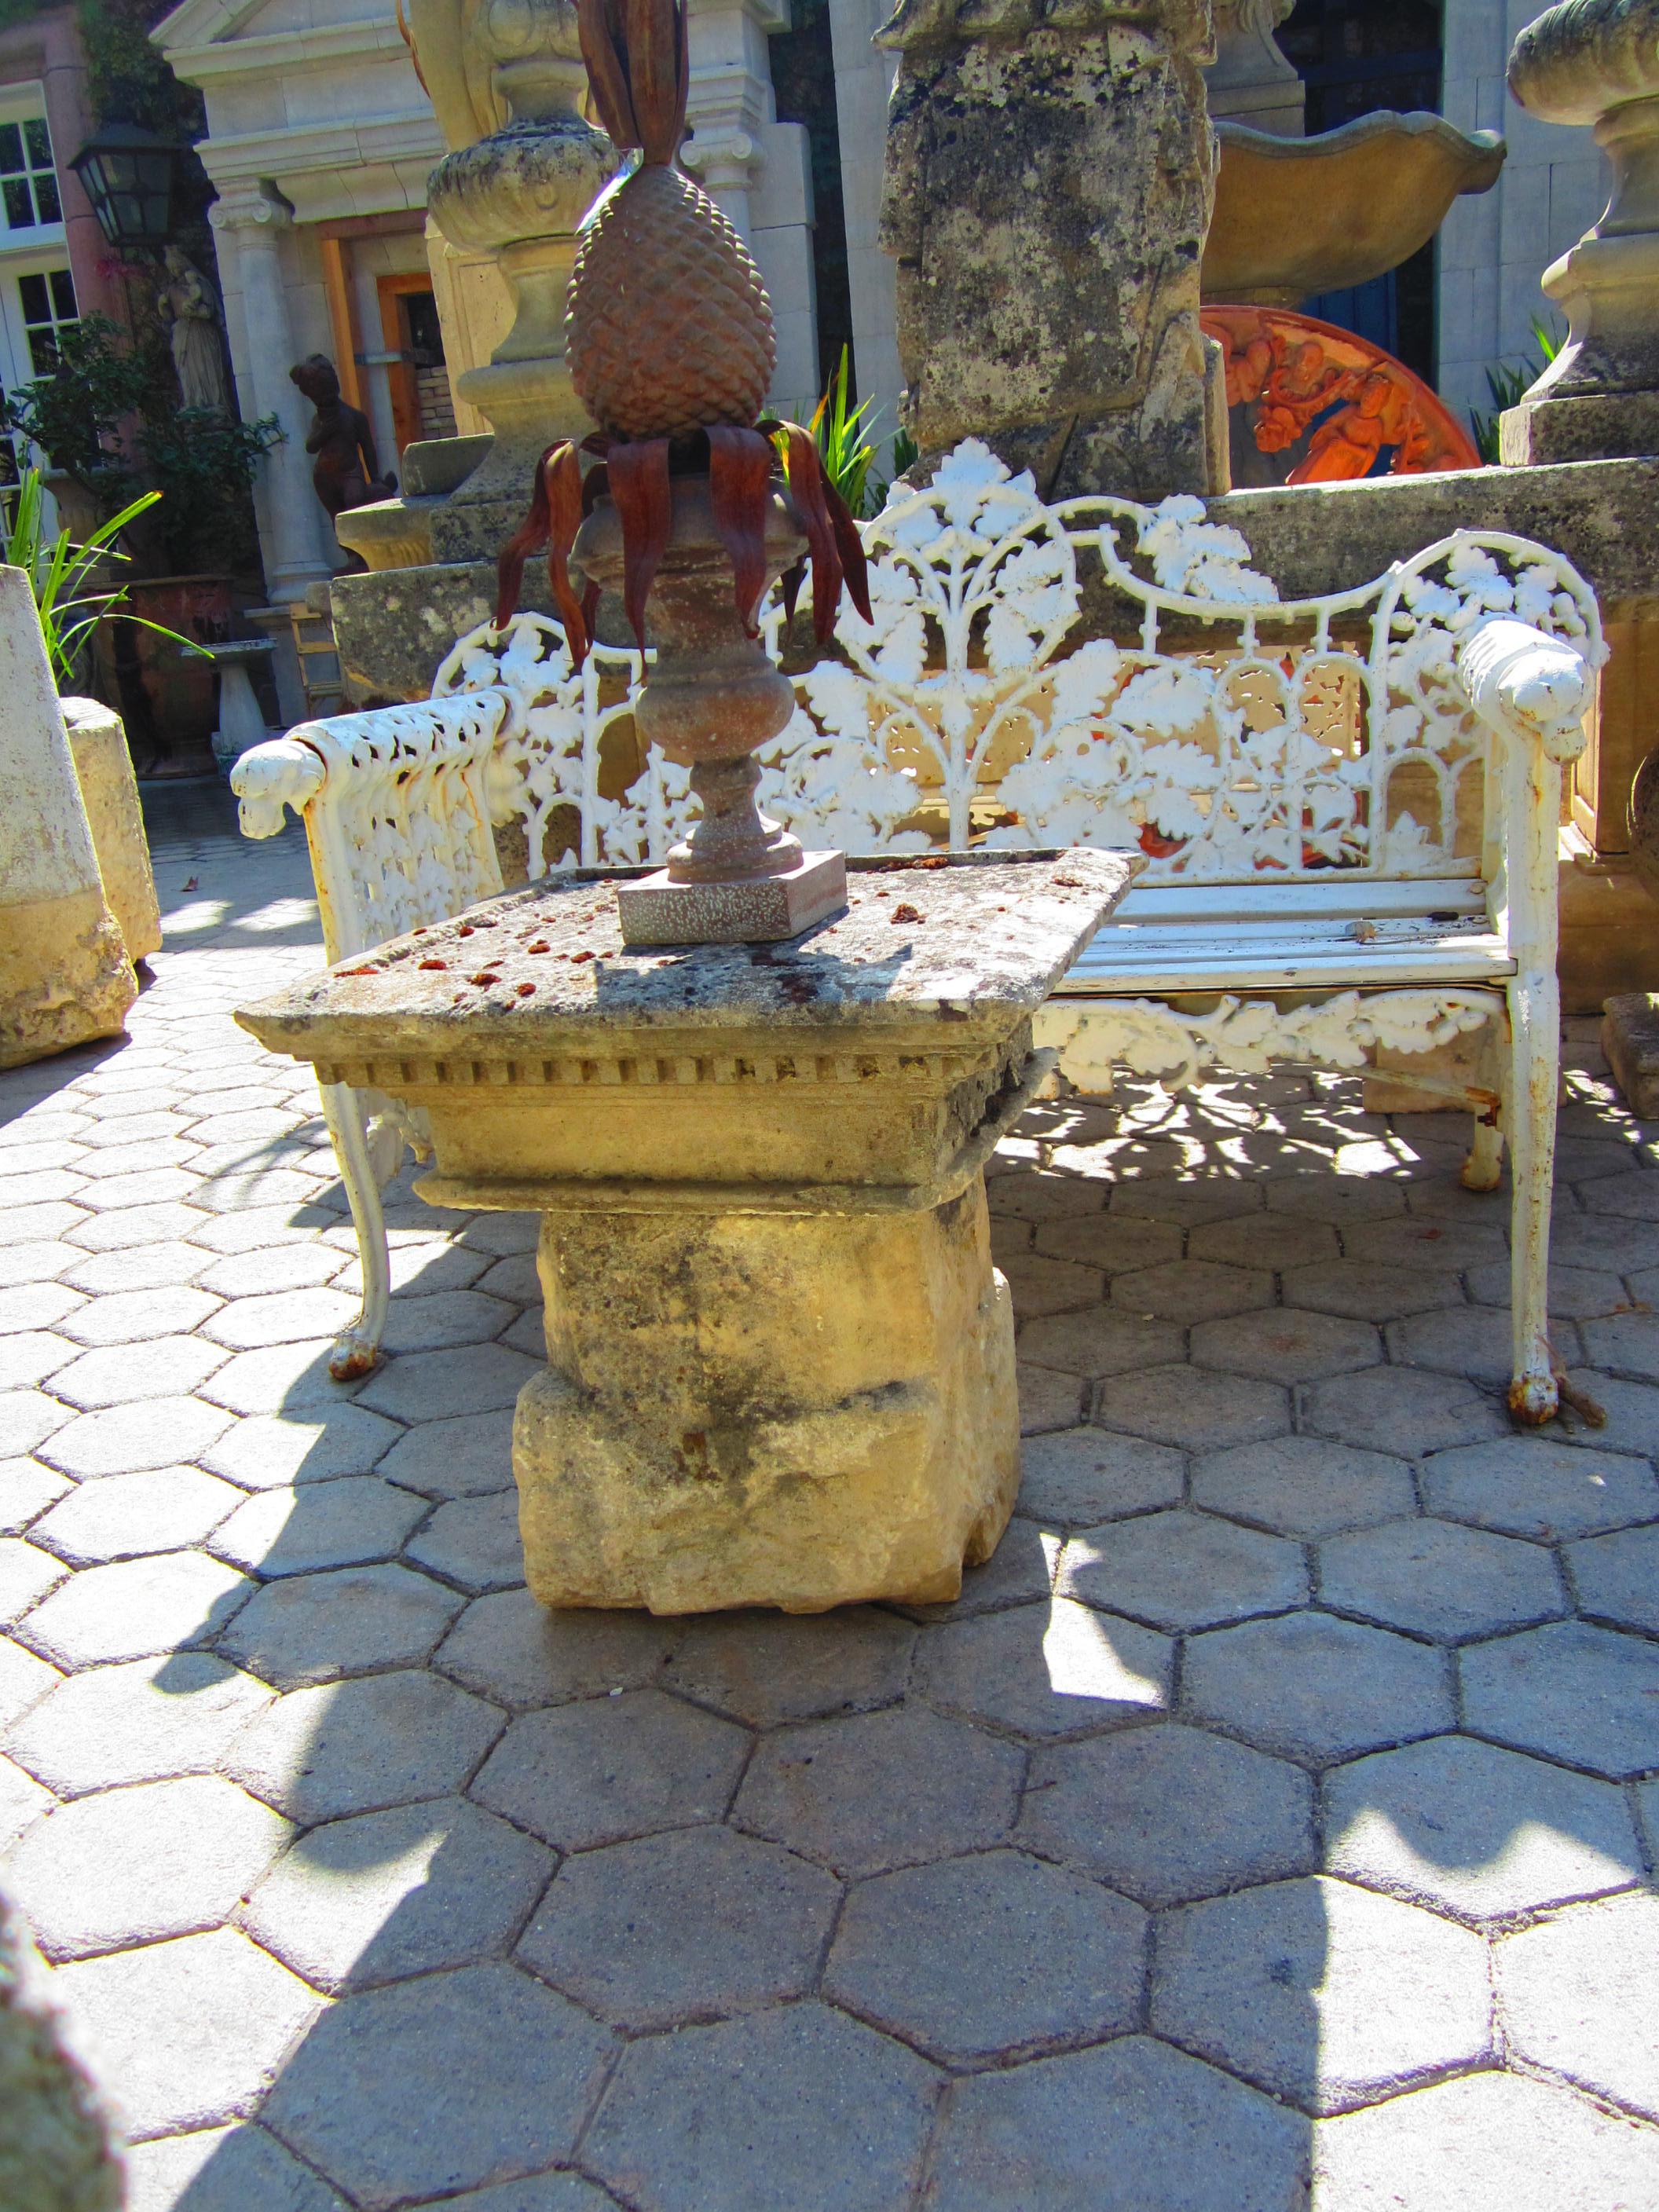 17th century stone base and Chapiteau Capital elements Hand carved stone creating a garden low coffee outdoor indoor side table. It will be the perfect touch by an outdoor fireplace, this table has a lot of charm and character. It can work in a